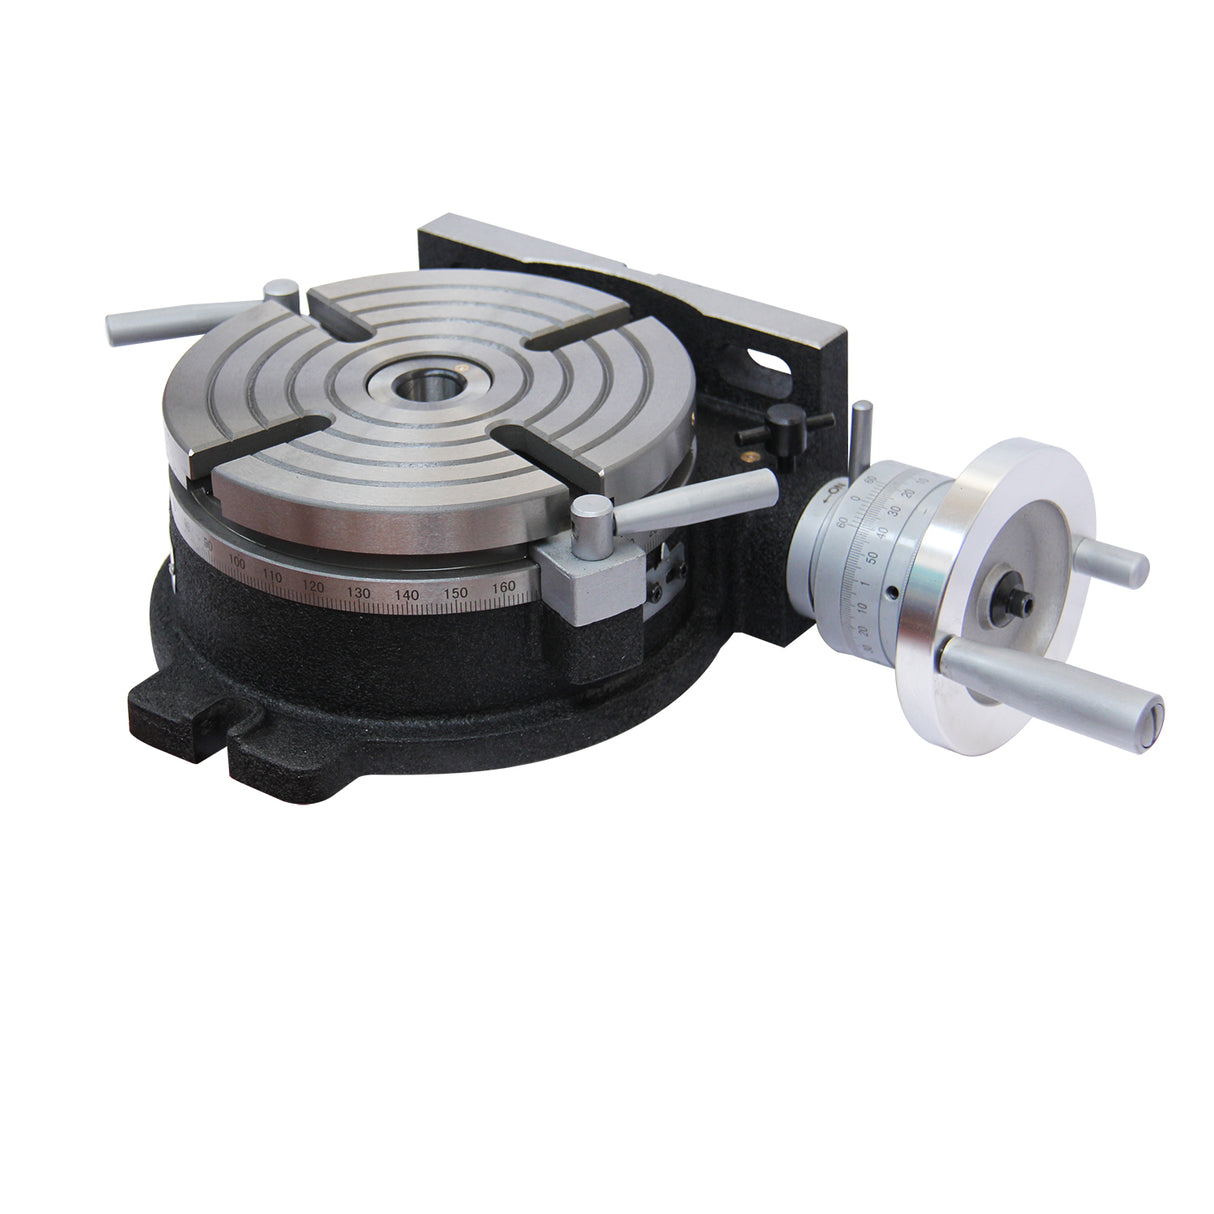 Kang Industrial HV-8 ø200mm Horizontal Vertical Rotary Table, Cast Iron Rotary Table, MT3 Bore